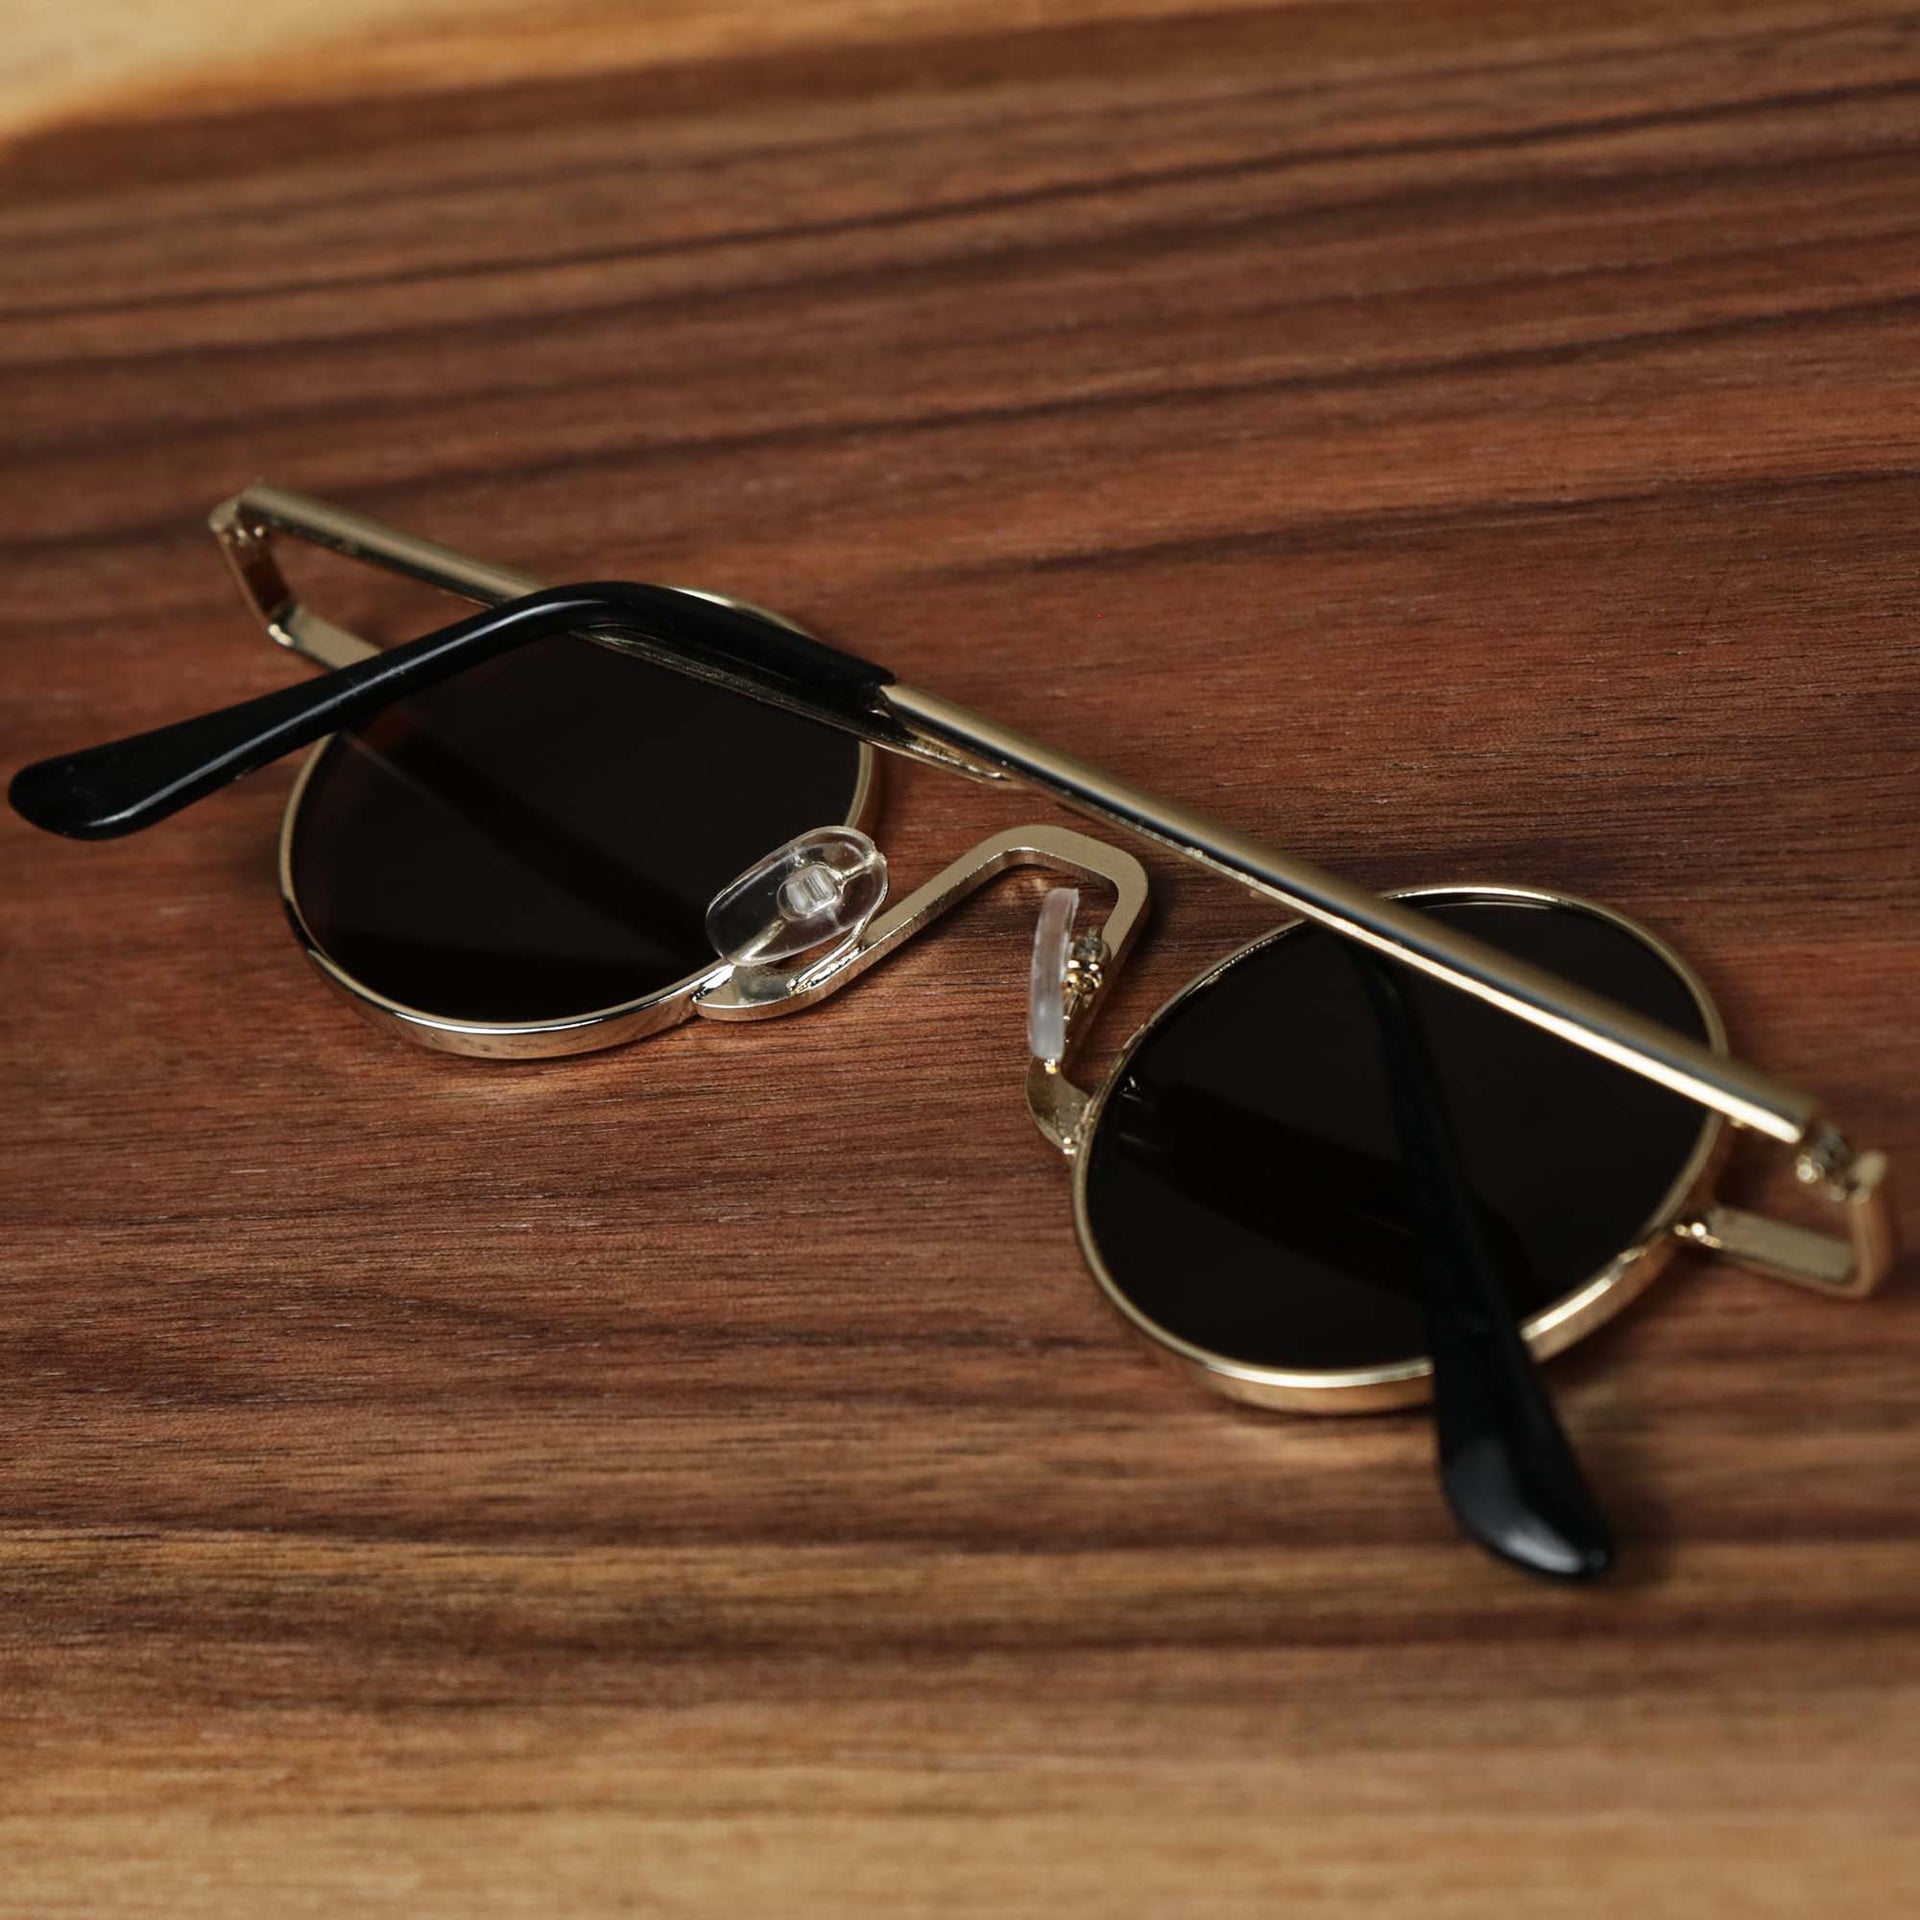 The Round Frames Brown Lens Sunglasses with Gold Frame folded up